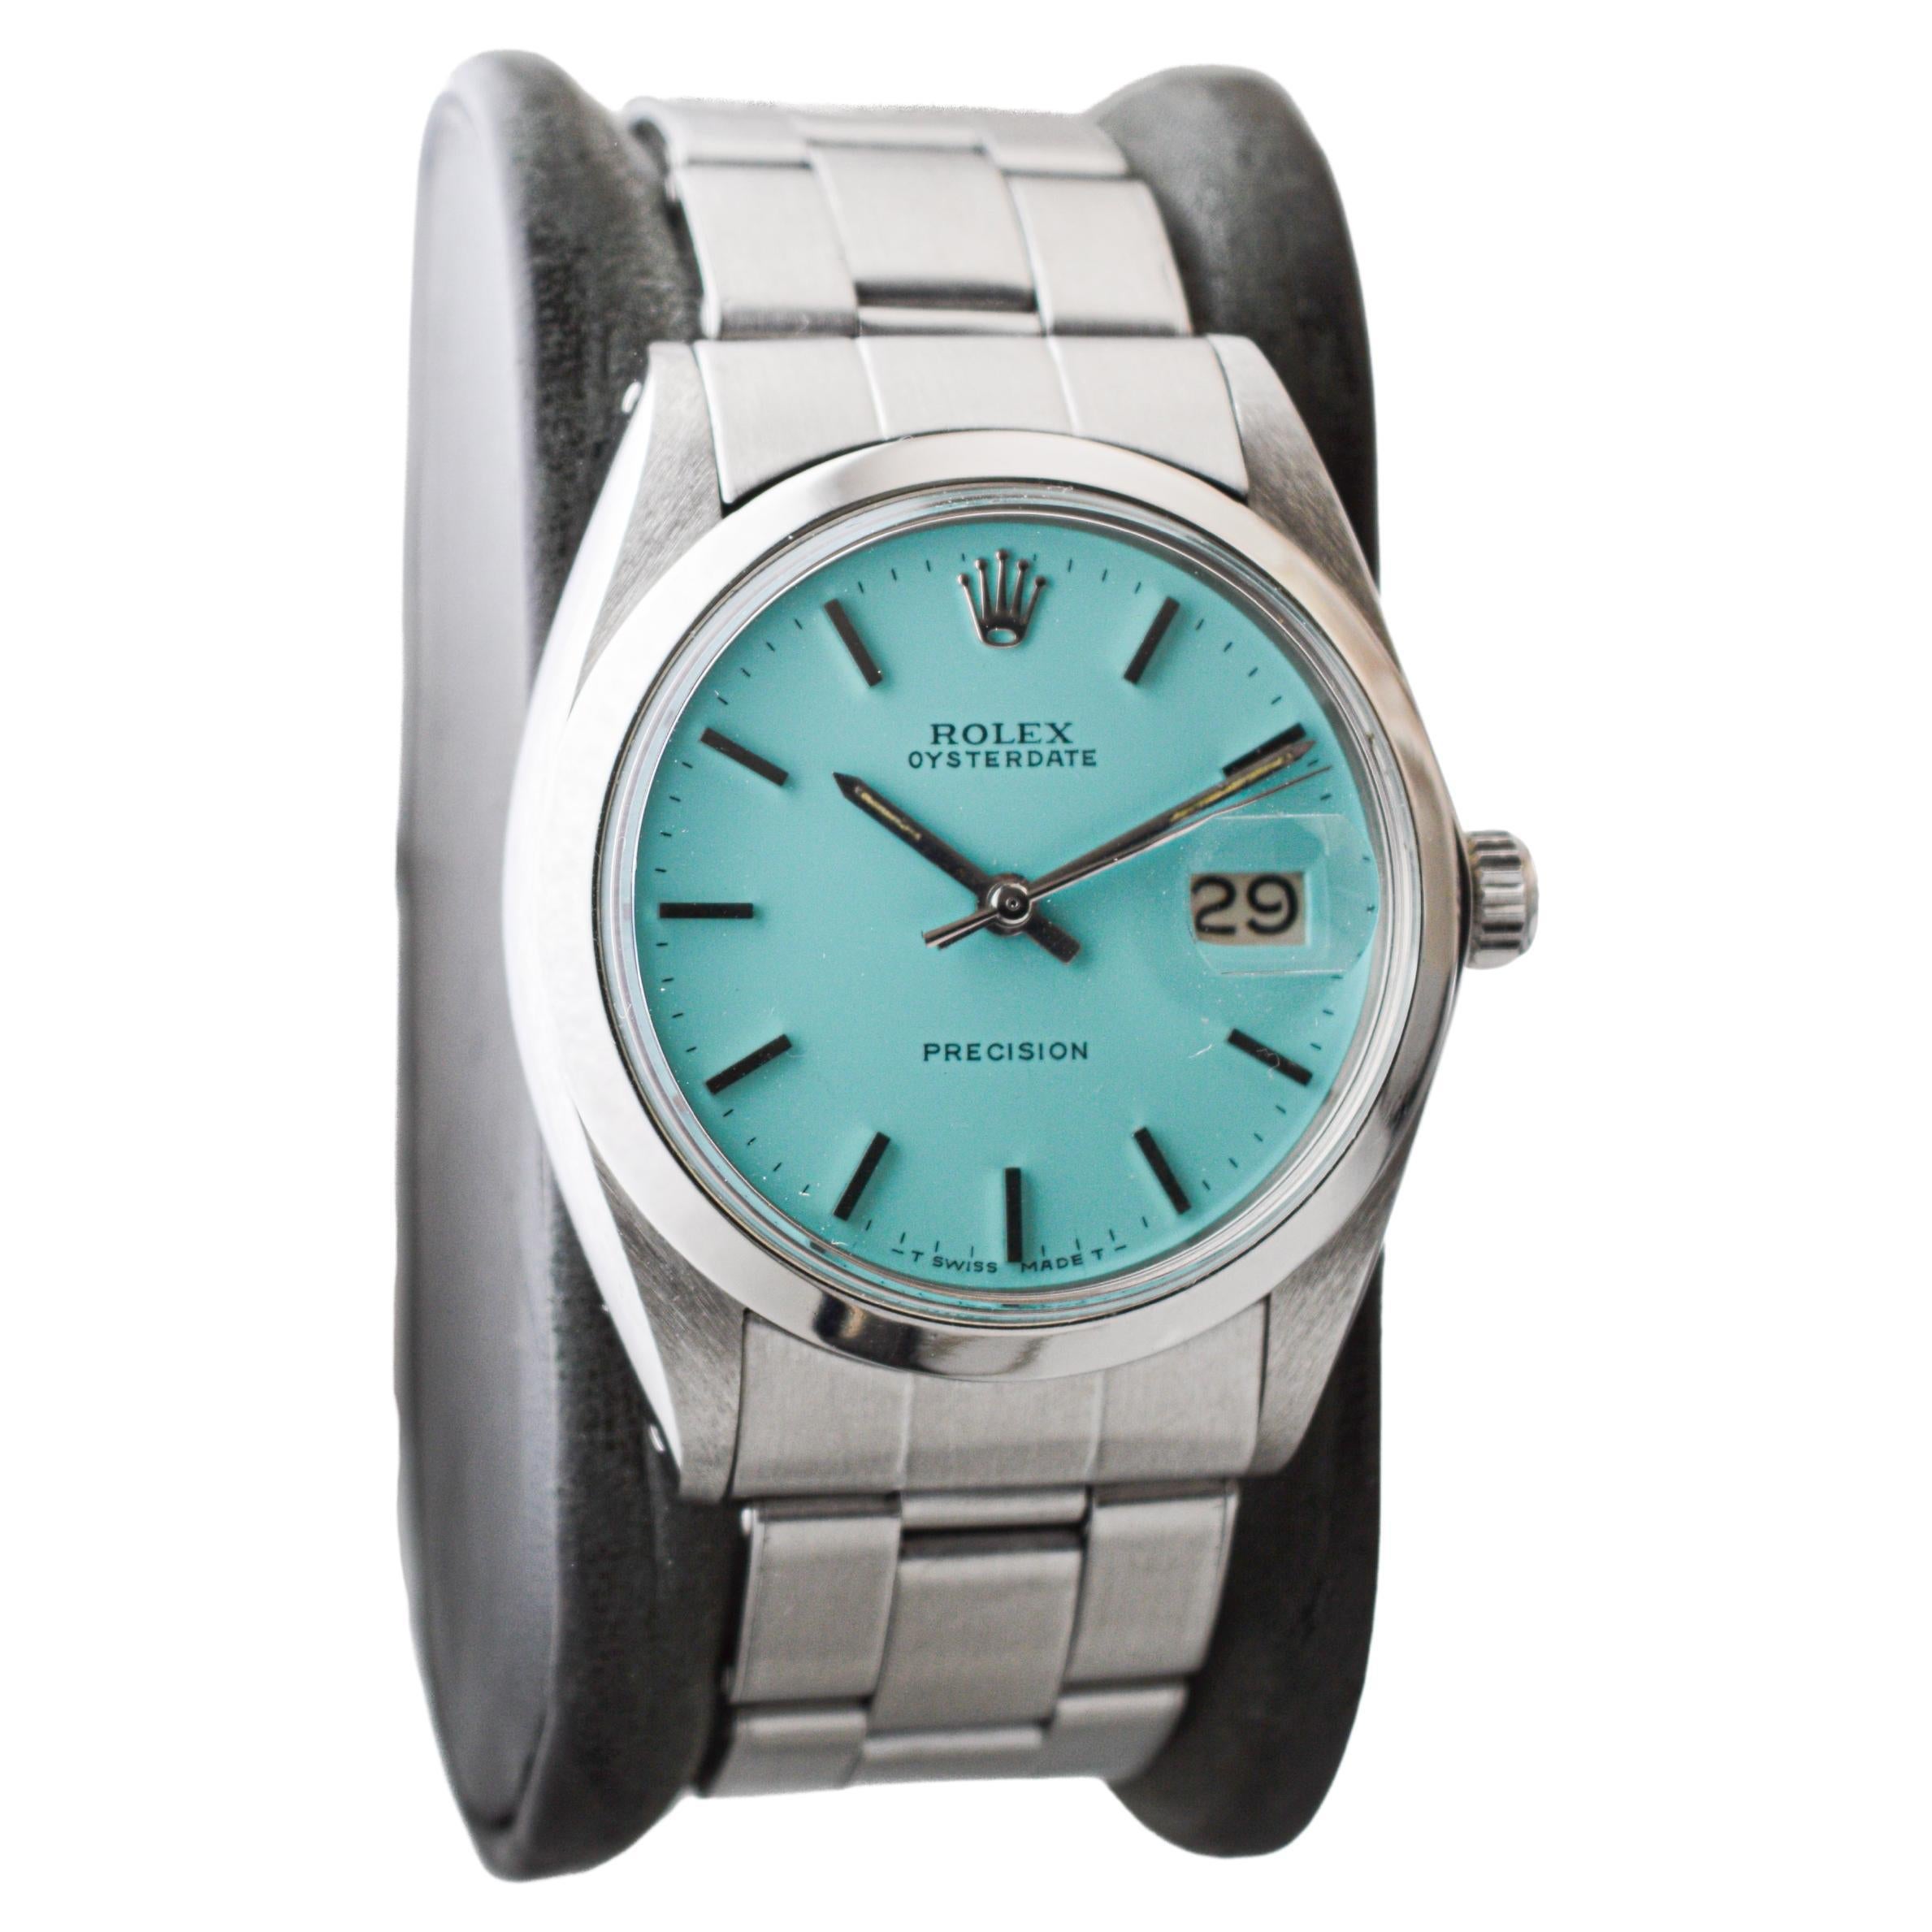 FACTORY / HOUSE: Rolex Watch Company
STYLE / REFERENCE: Oysterdate / Reference 5500 / 6694
METAL / MATERIAL: Stainless Steel
CIRCA / YEAR: 1960's
DIMENSIONS / SIZE: Length 42mm X Diameter 34mm
MOVEMENT / CALIBER: Manual Winding / 17 Jewels / Caliber